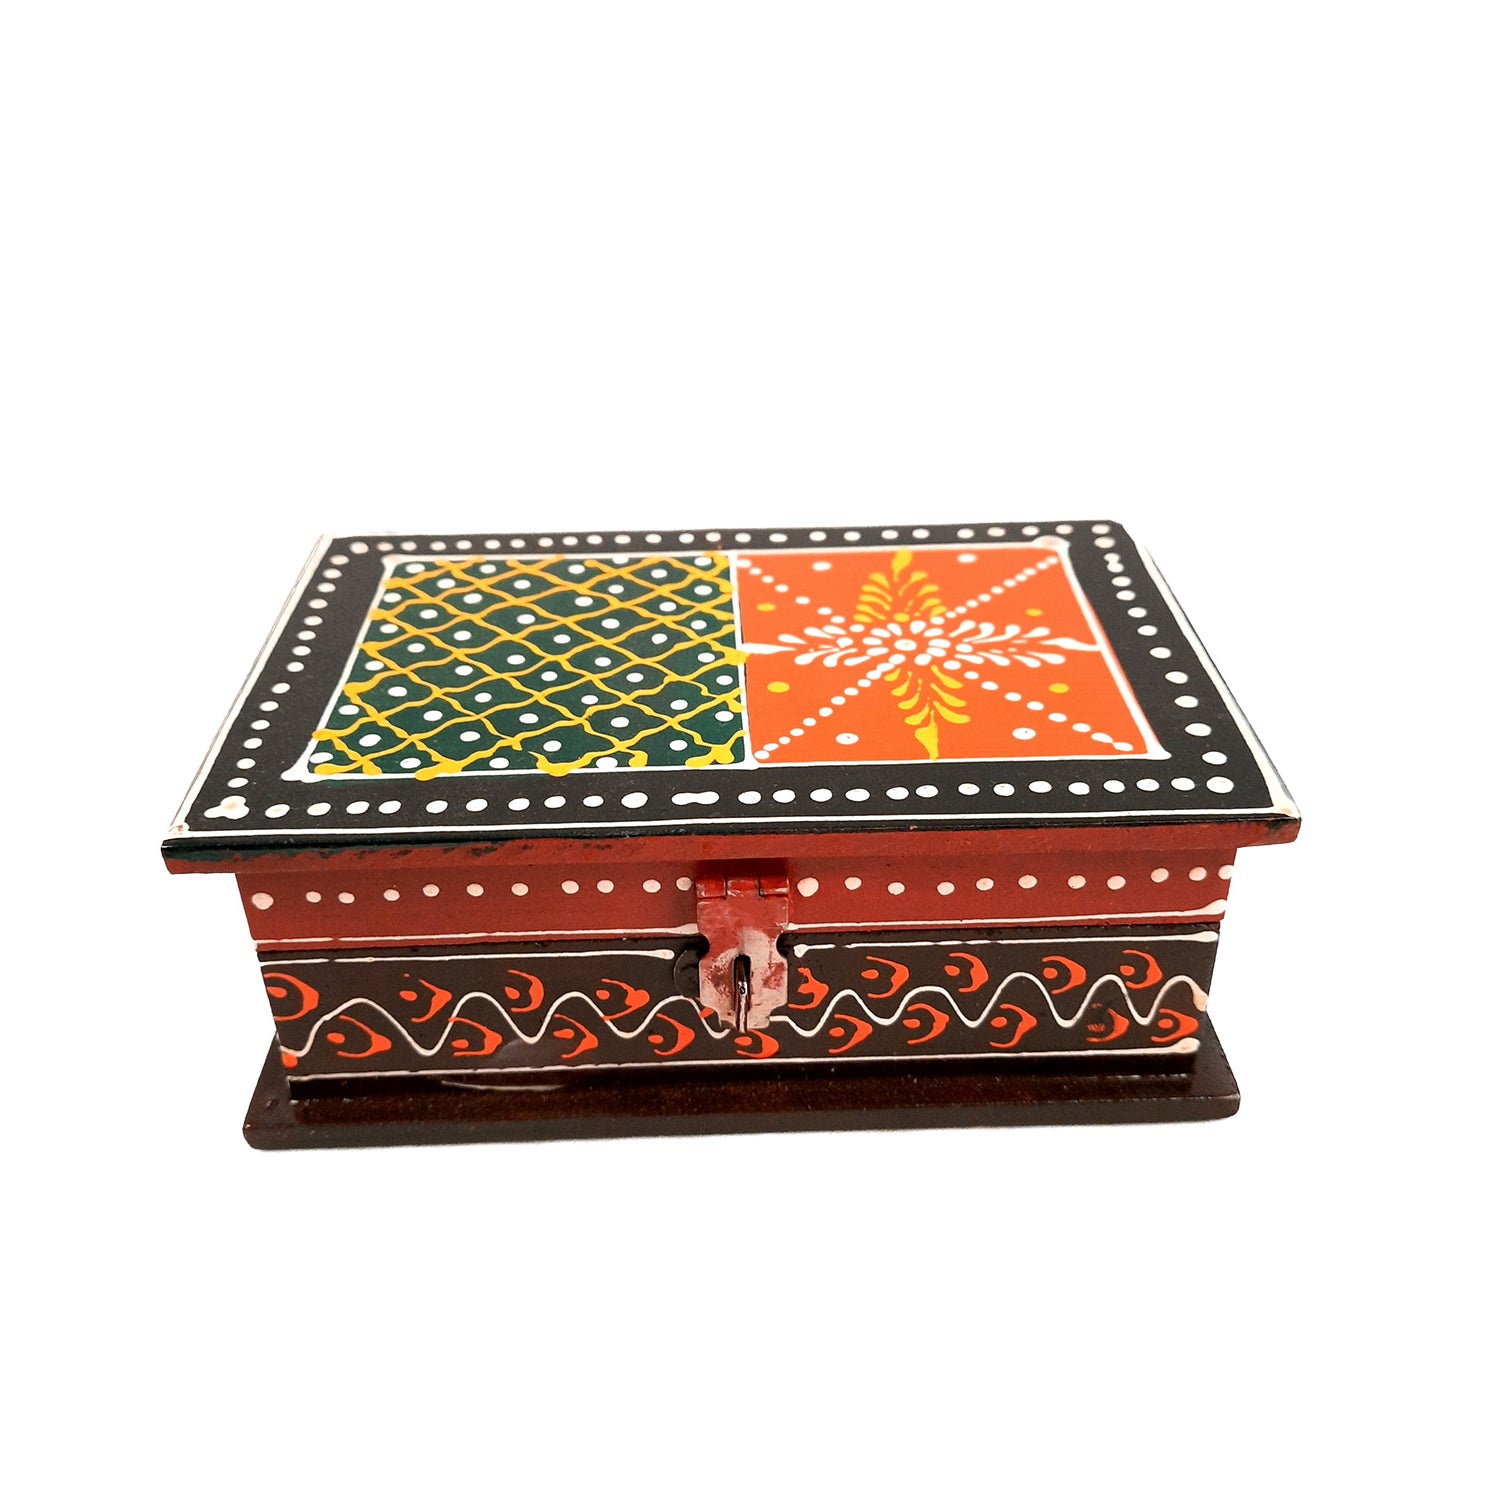 Shop Wooden Jewelry Storage Boxes - Elegant & Functional